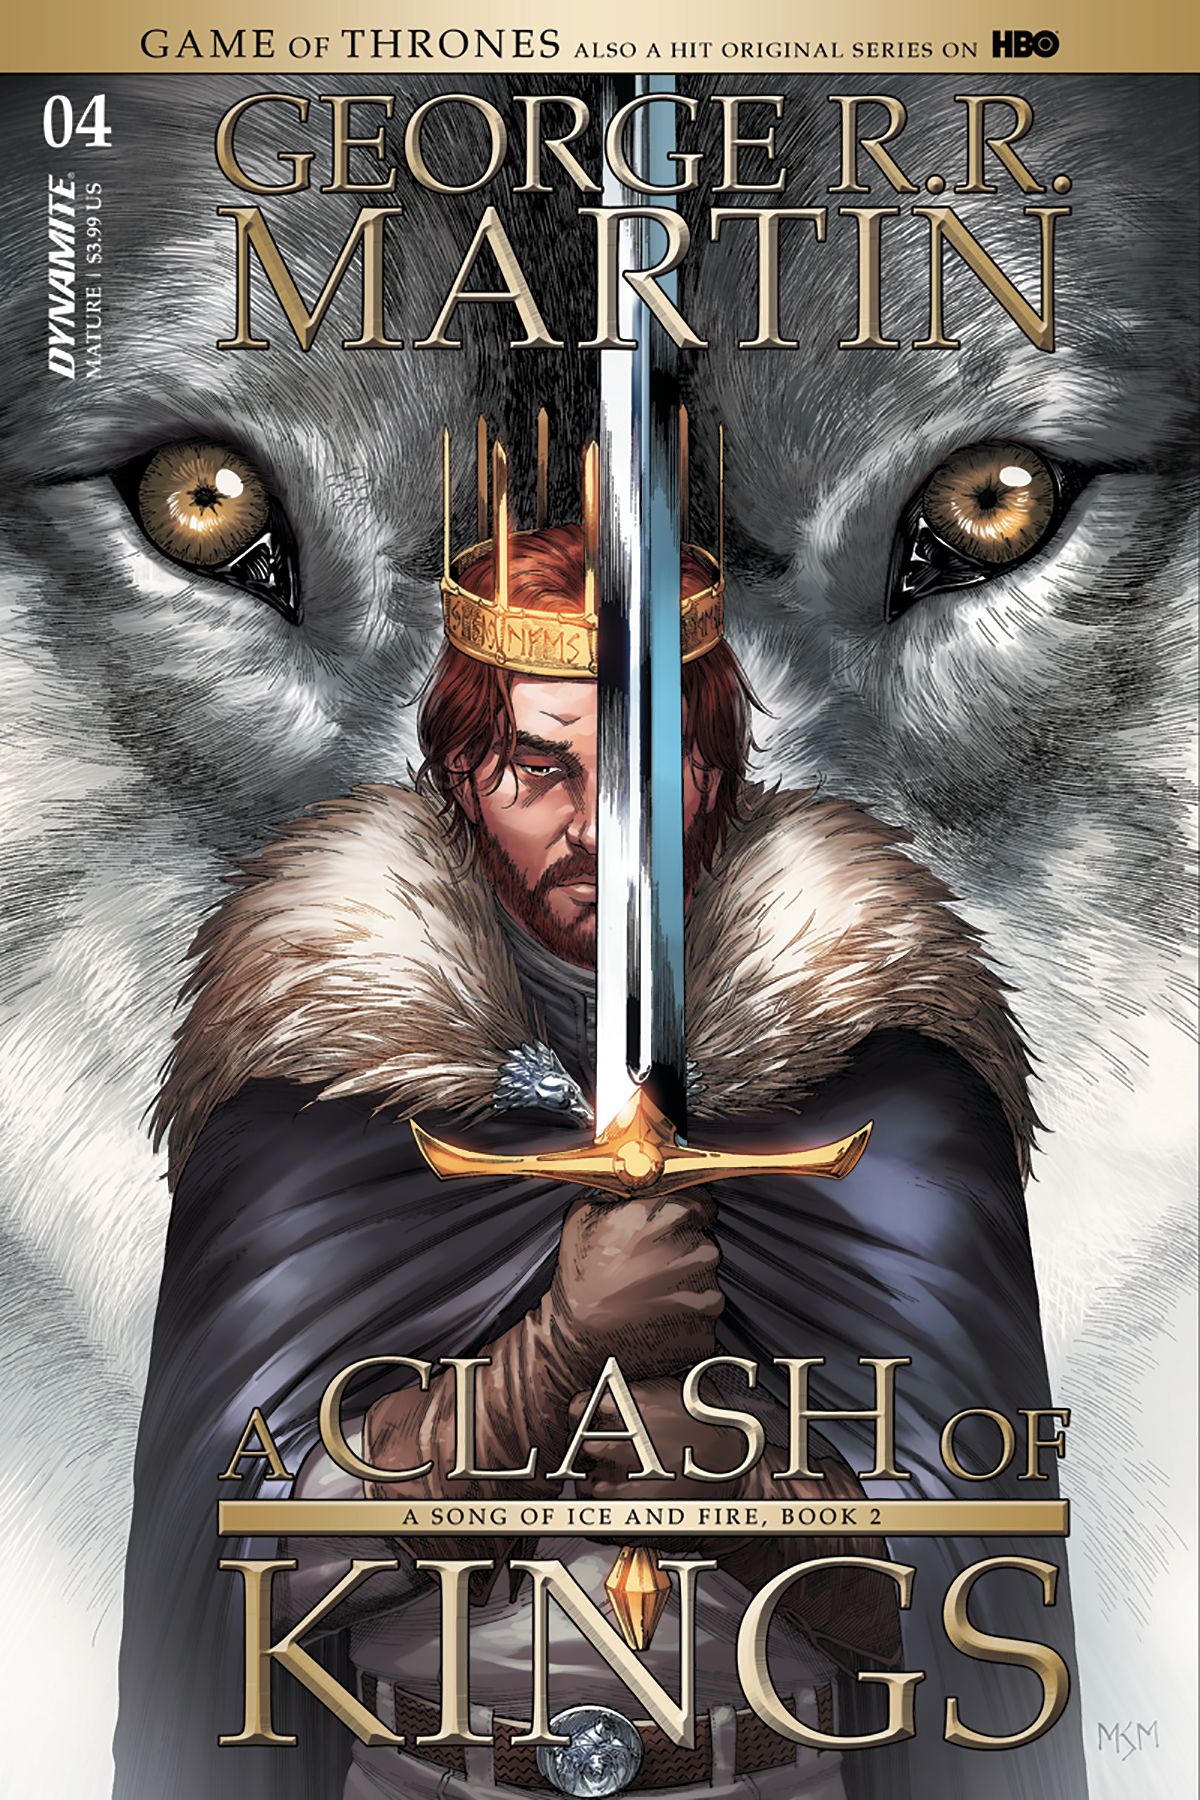 Game of Thrones: A Clash of Kings #4 Comic